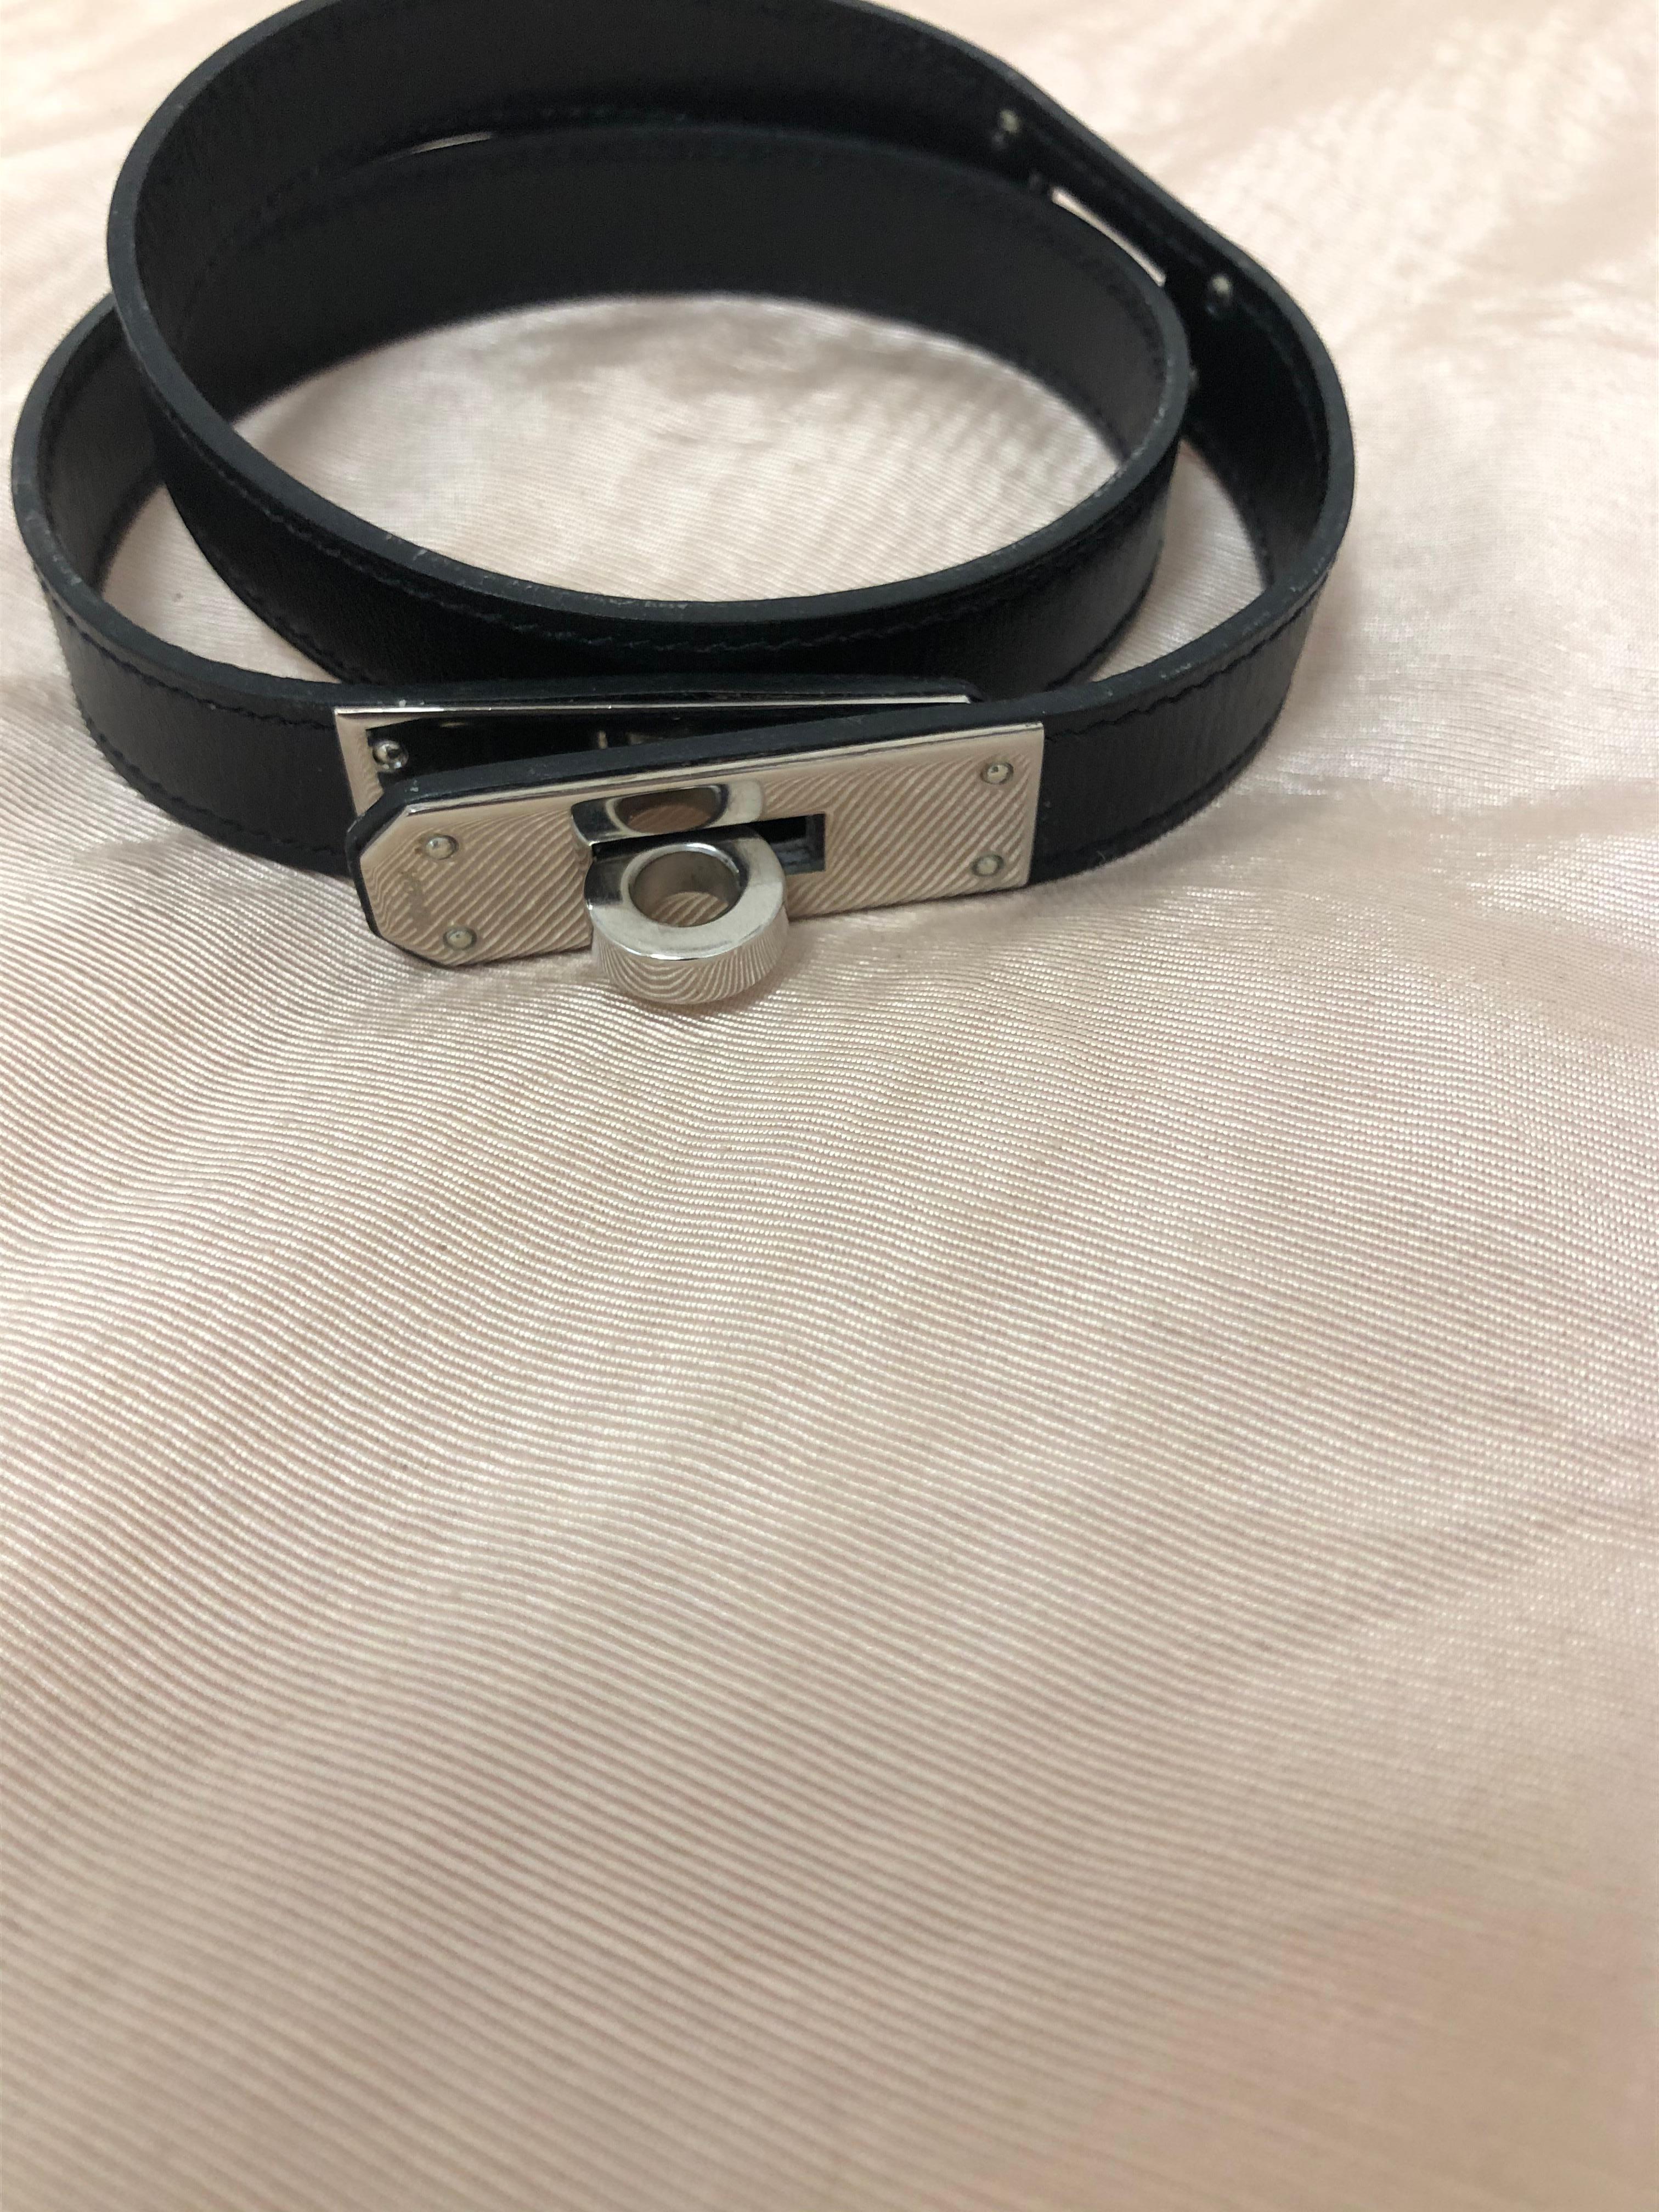 This 2002 Hermes Kelly Choker can double up as double or triple wrap bracelet depending on the size of your wrist. It is a choker or bracelet that can be worn every day.

Measurements are as follows: width .70